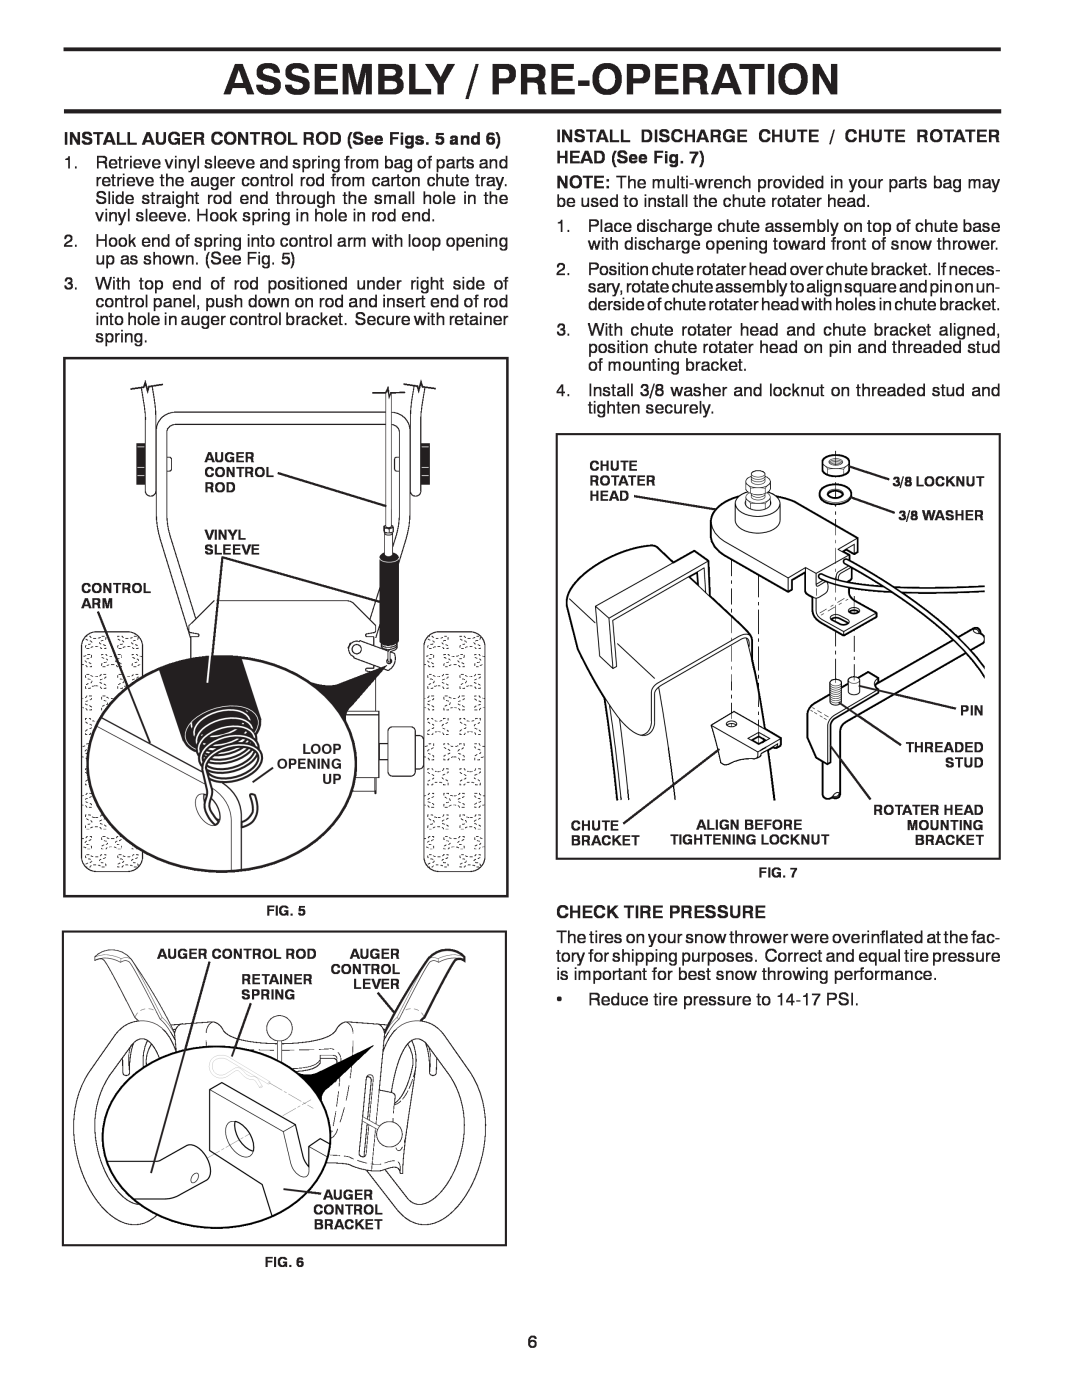 Poulan 436132, 96192004200 Assembly / Pre-Operation, INSTALL AUGER CONTROL ROD See Figs. 5 and, Check Tire Pressure 